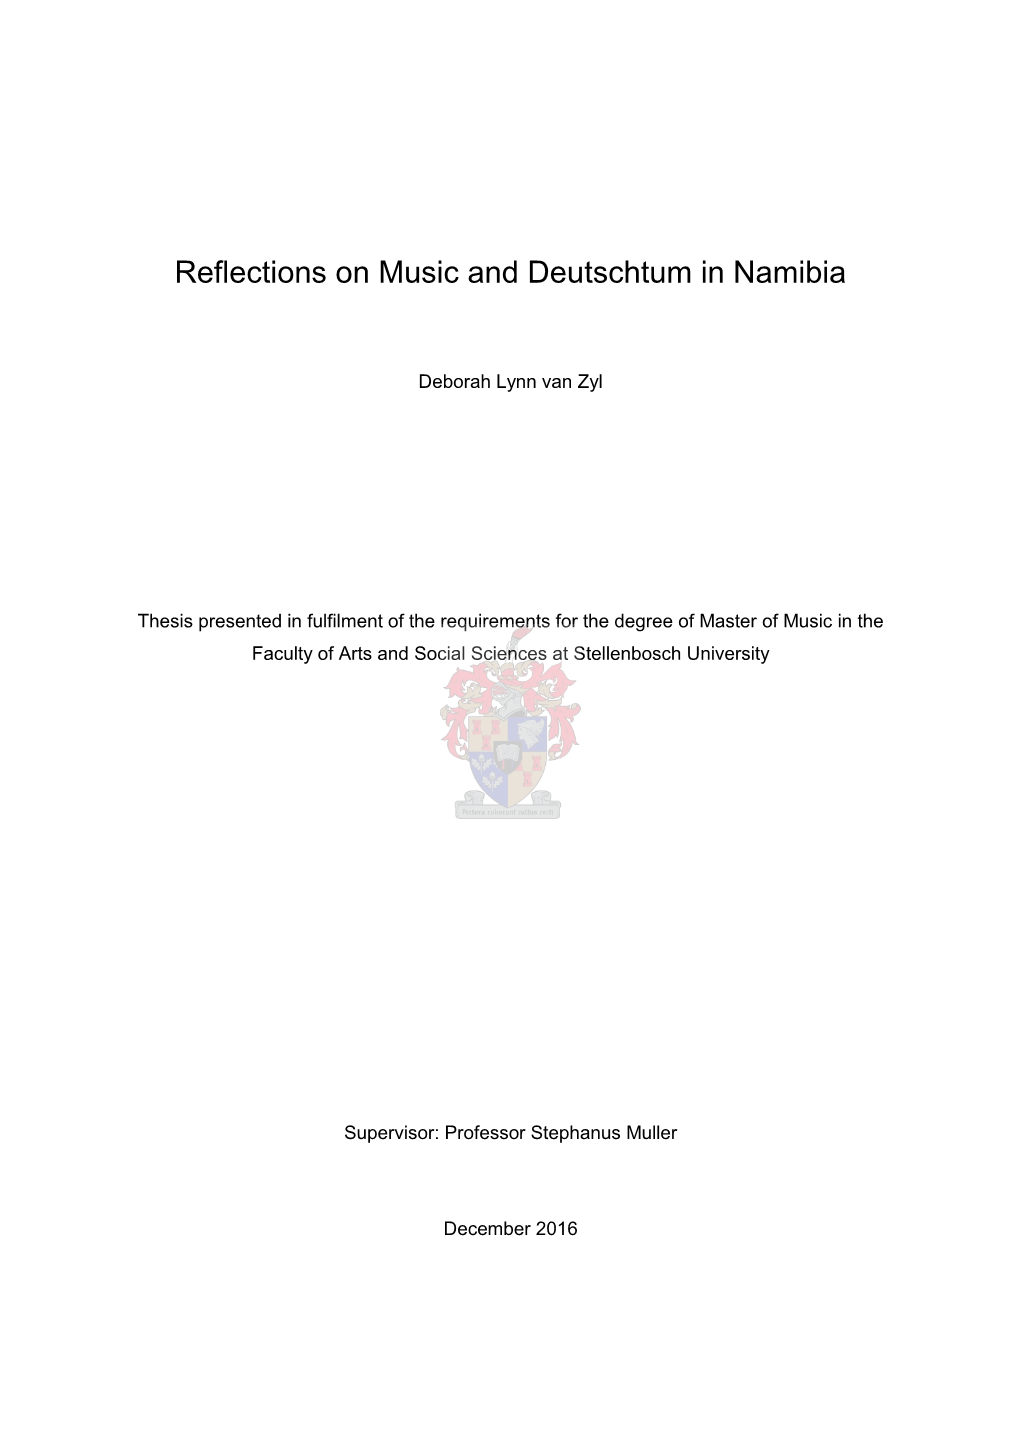 Reflections on Music and Deutschtum in Namibia